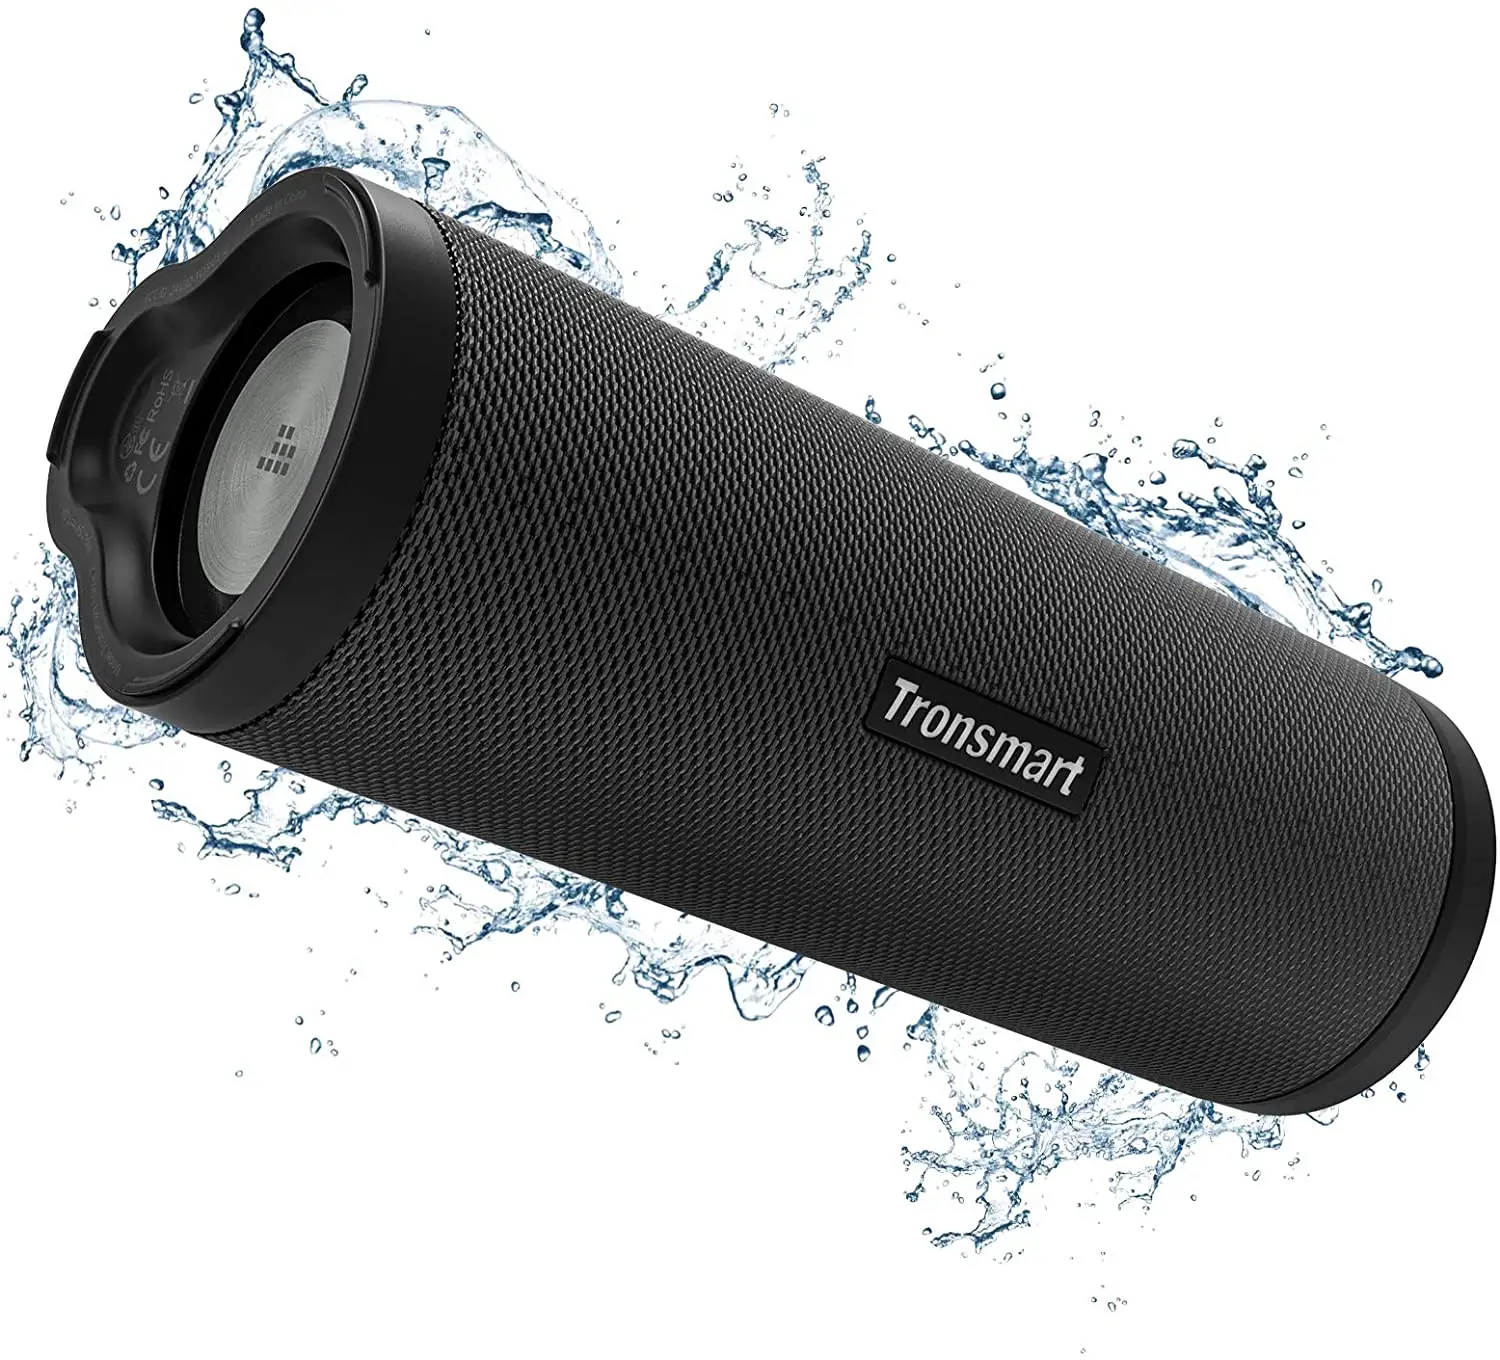 Tronsmart Force 2 Wholesale-Direct Official Speaker 30W Portable with QCC3021 Chip, IPX7 Waterproof, Type-C Fast Charging